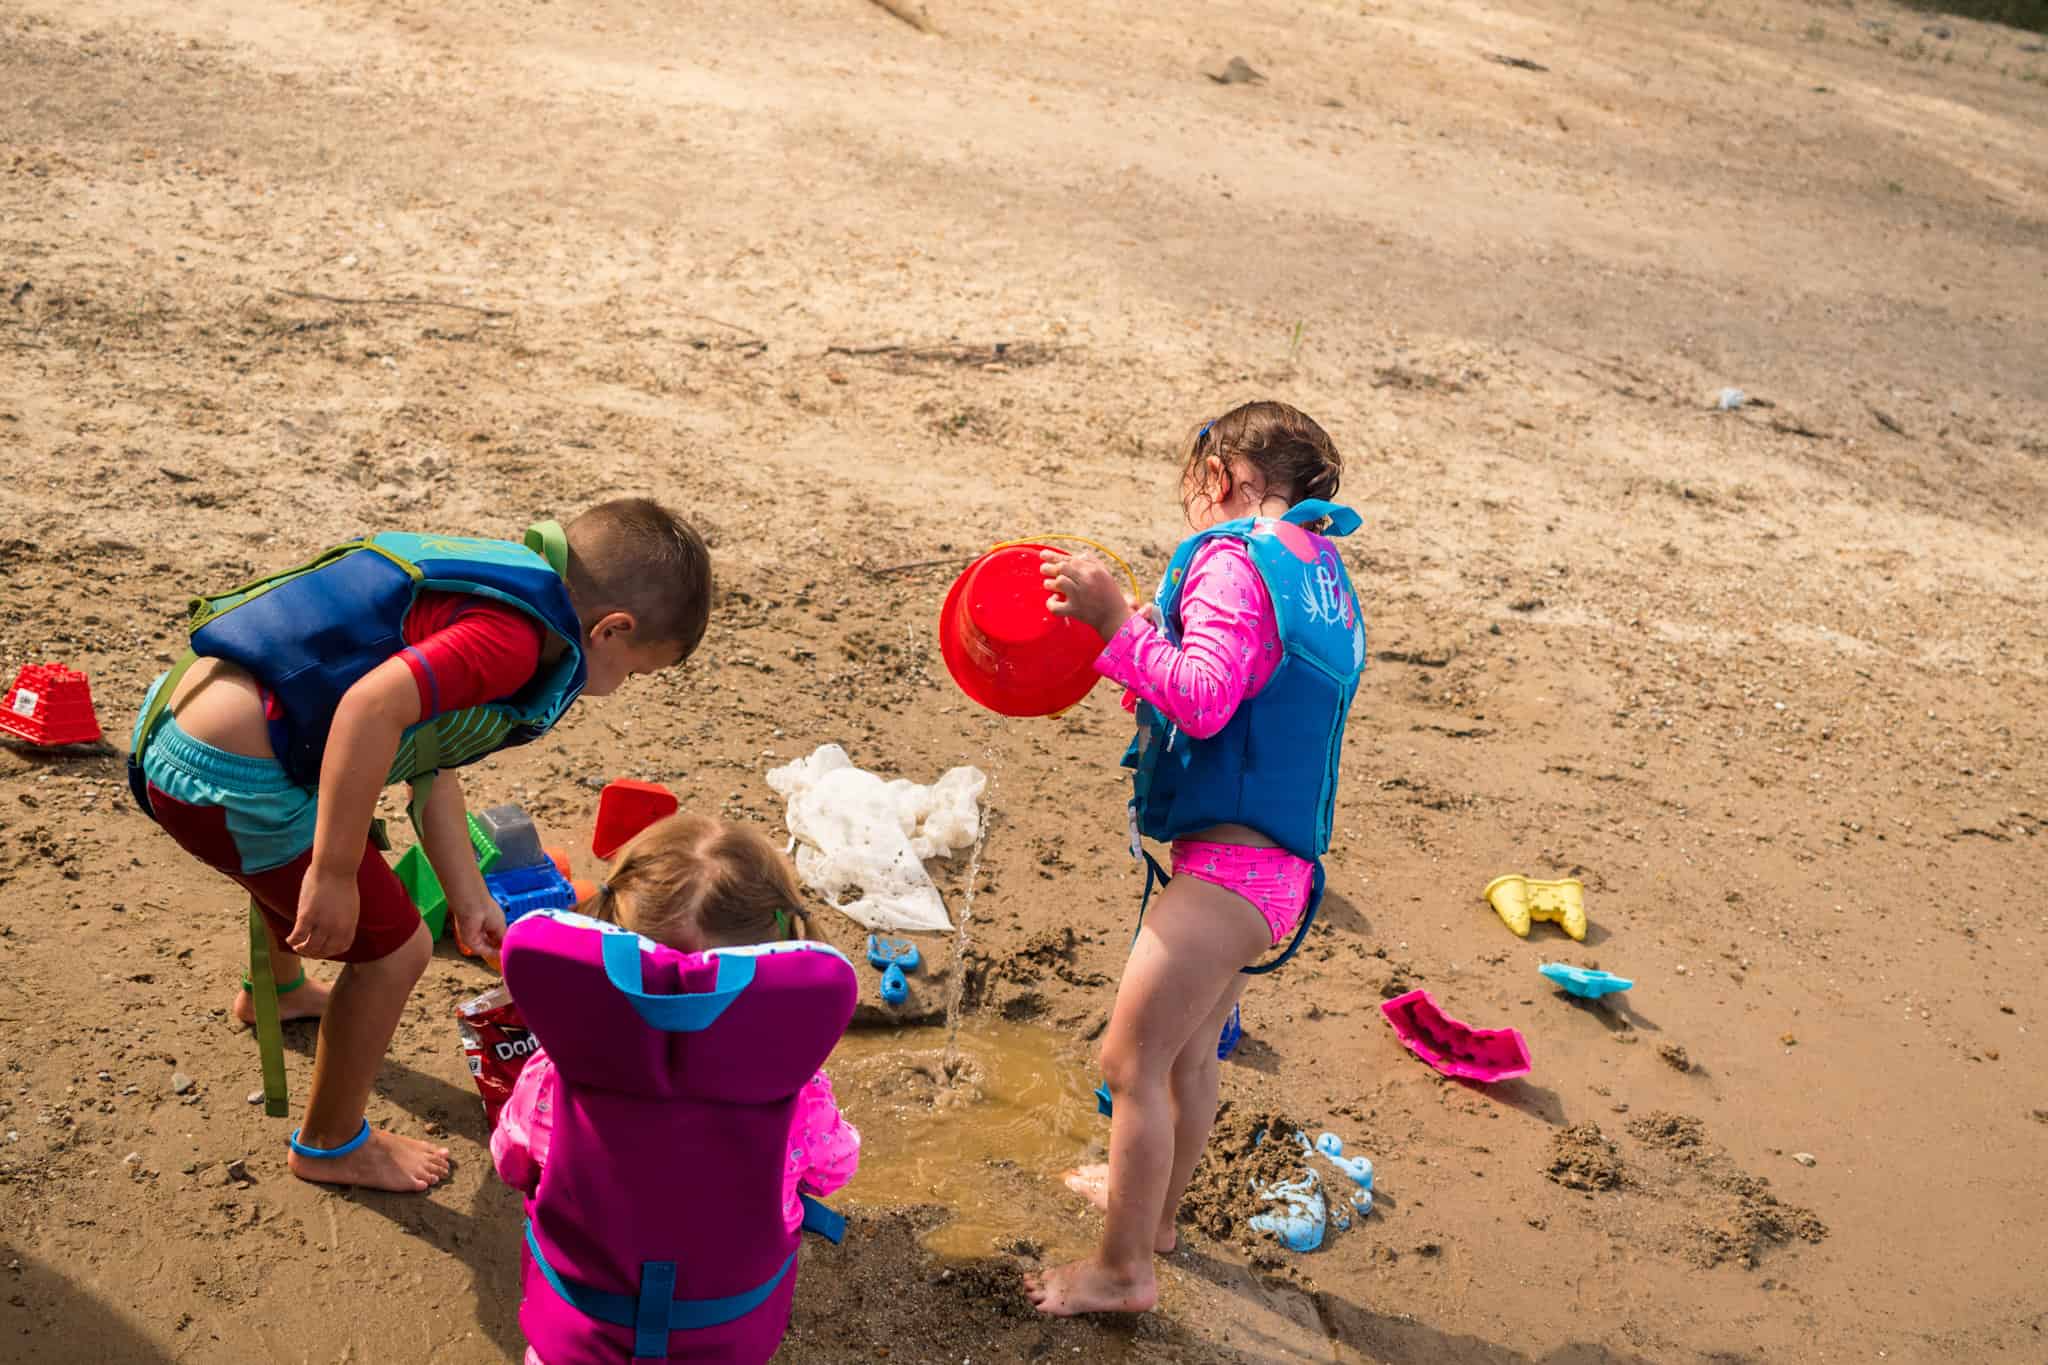 Children playing in sand with life jackets on - how to choose the best life jacket for kids